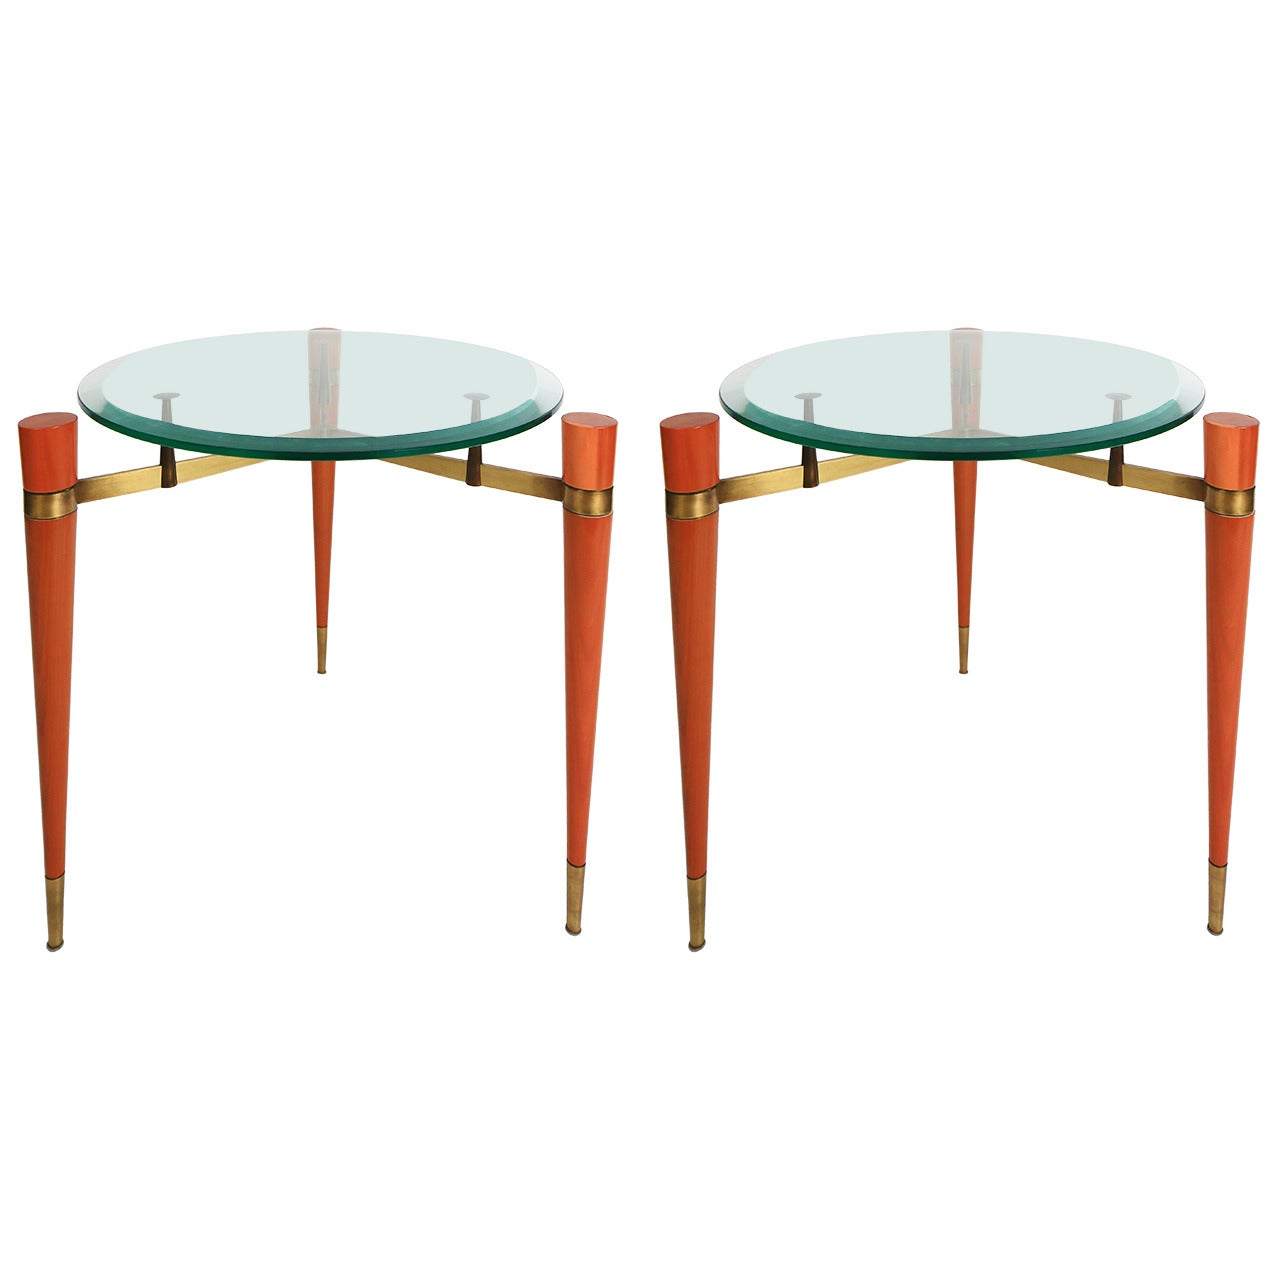 Outstanding Pair of Italian 1970s Side Tables or Night Stands